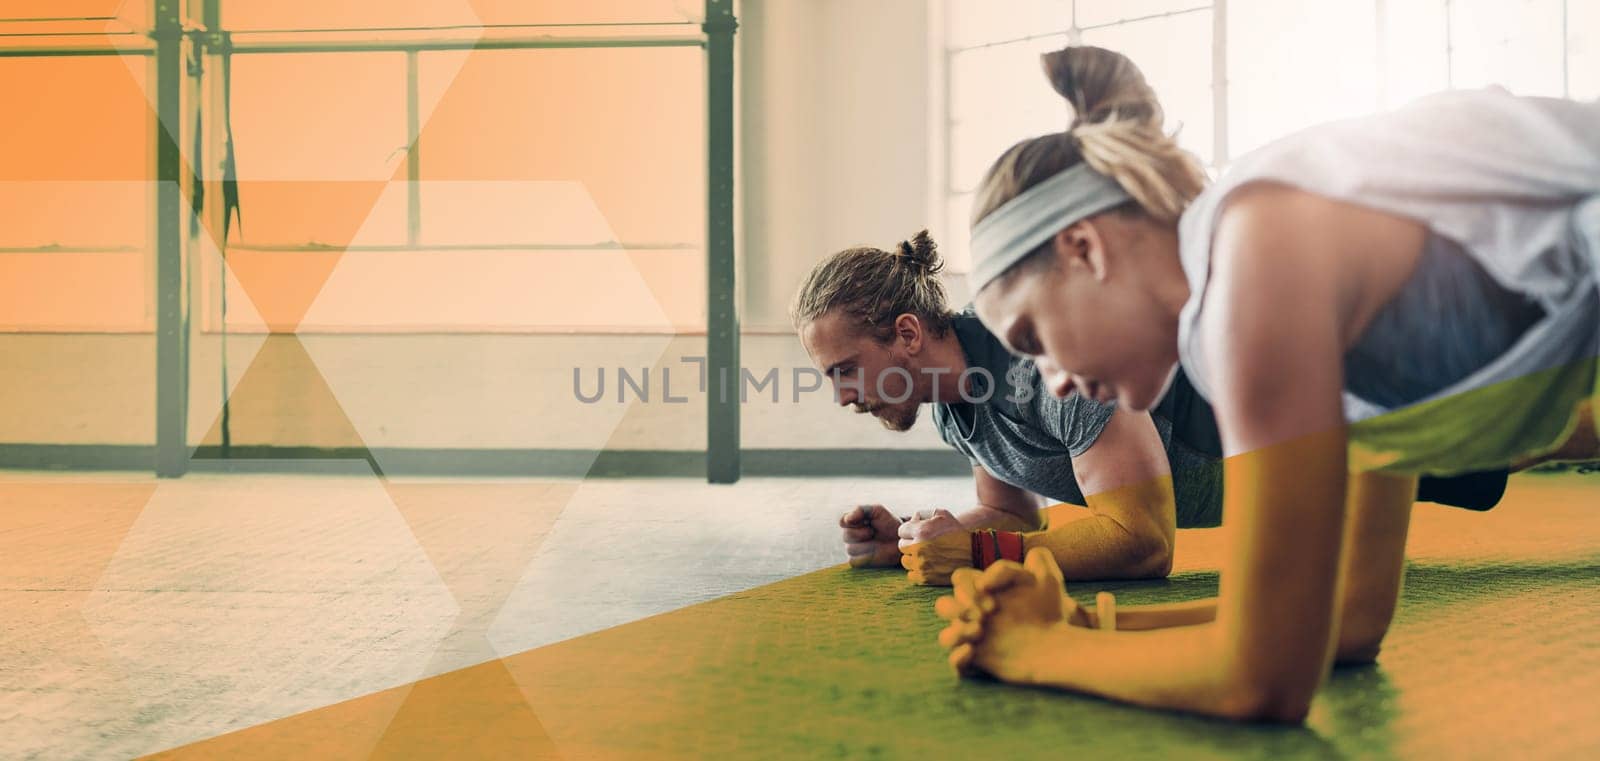 Fitness, people and plank exercise at gym together for training workout. Athlete man and woman team on ground for power challenge, commitment or strong muscle at wellness club with mockup and overlay.